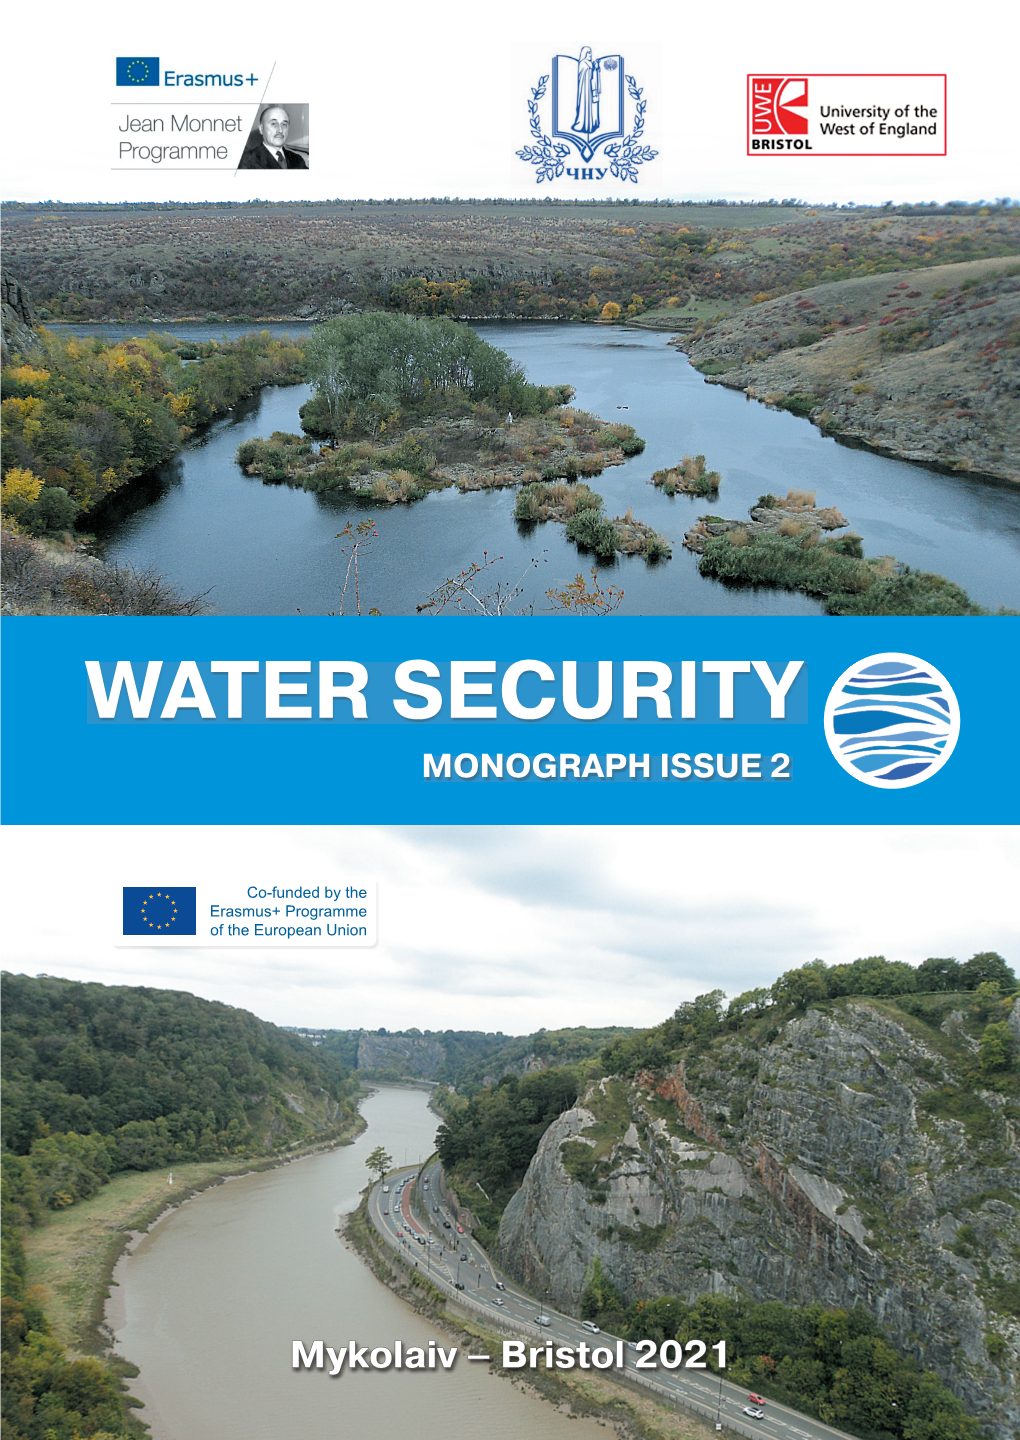 Water Security Monograph Issue 2